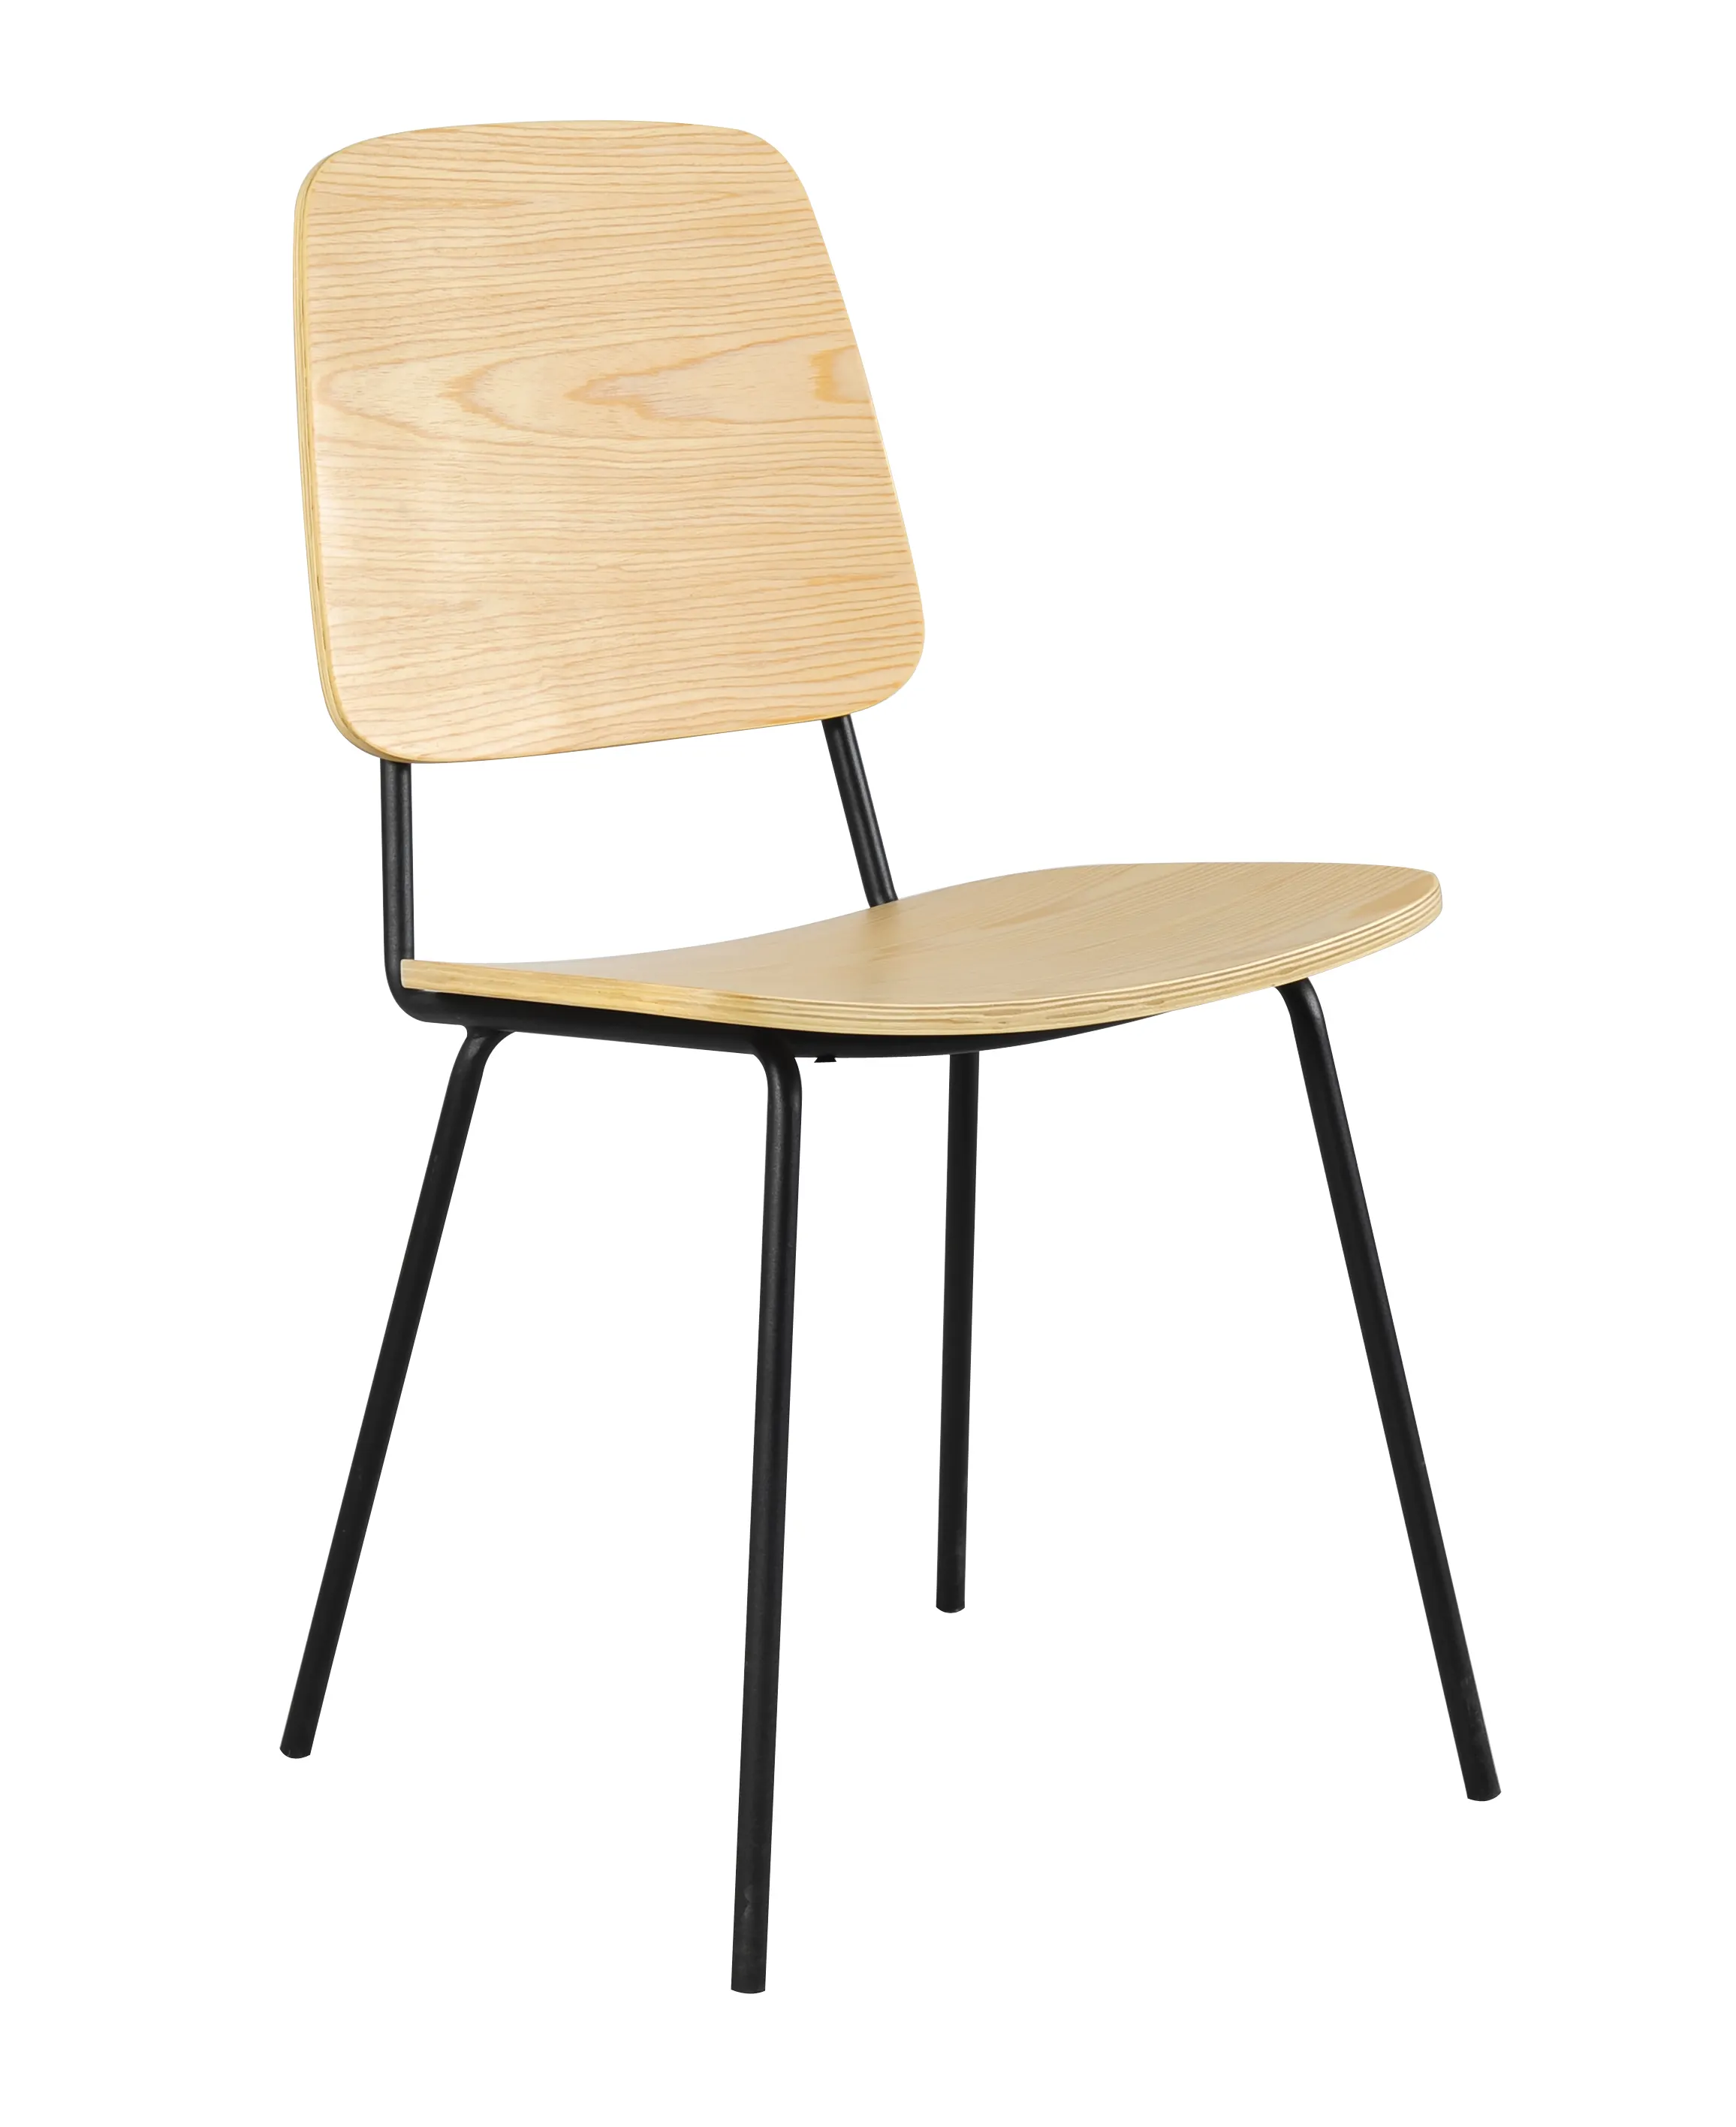 AM-0670 hot sale in plywood with oak veneer metal frame bentwood dining chair for home